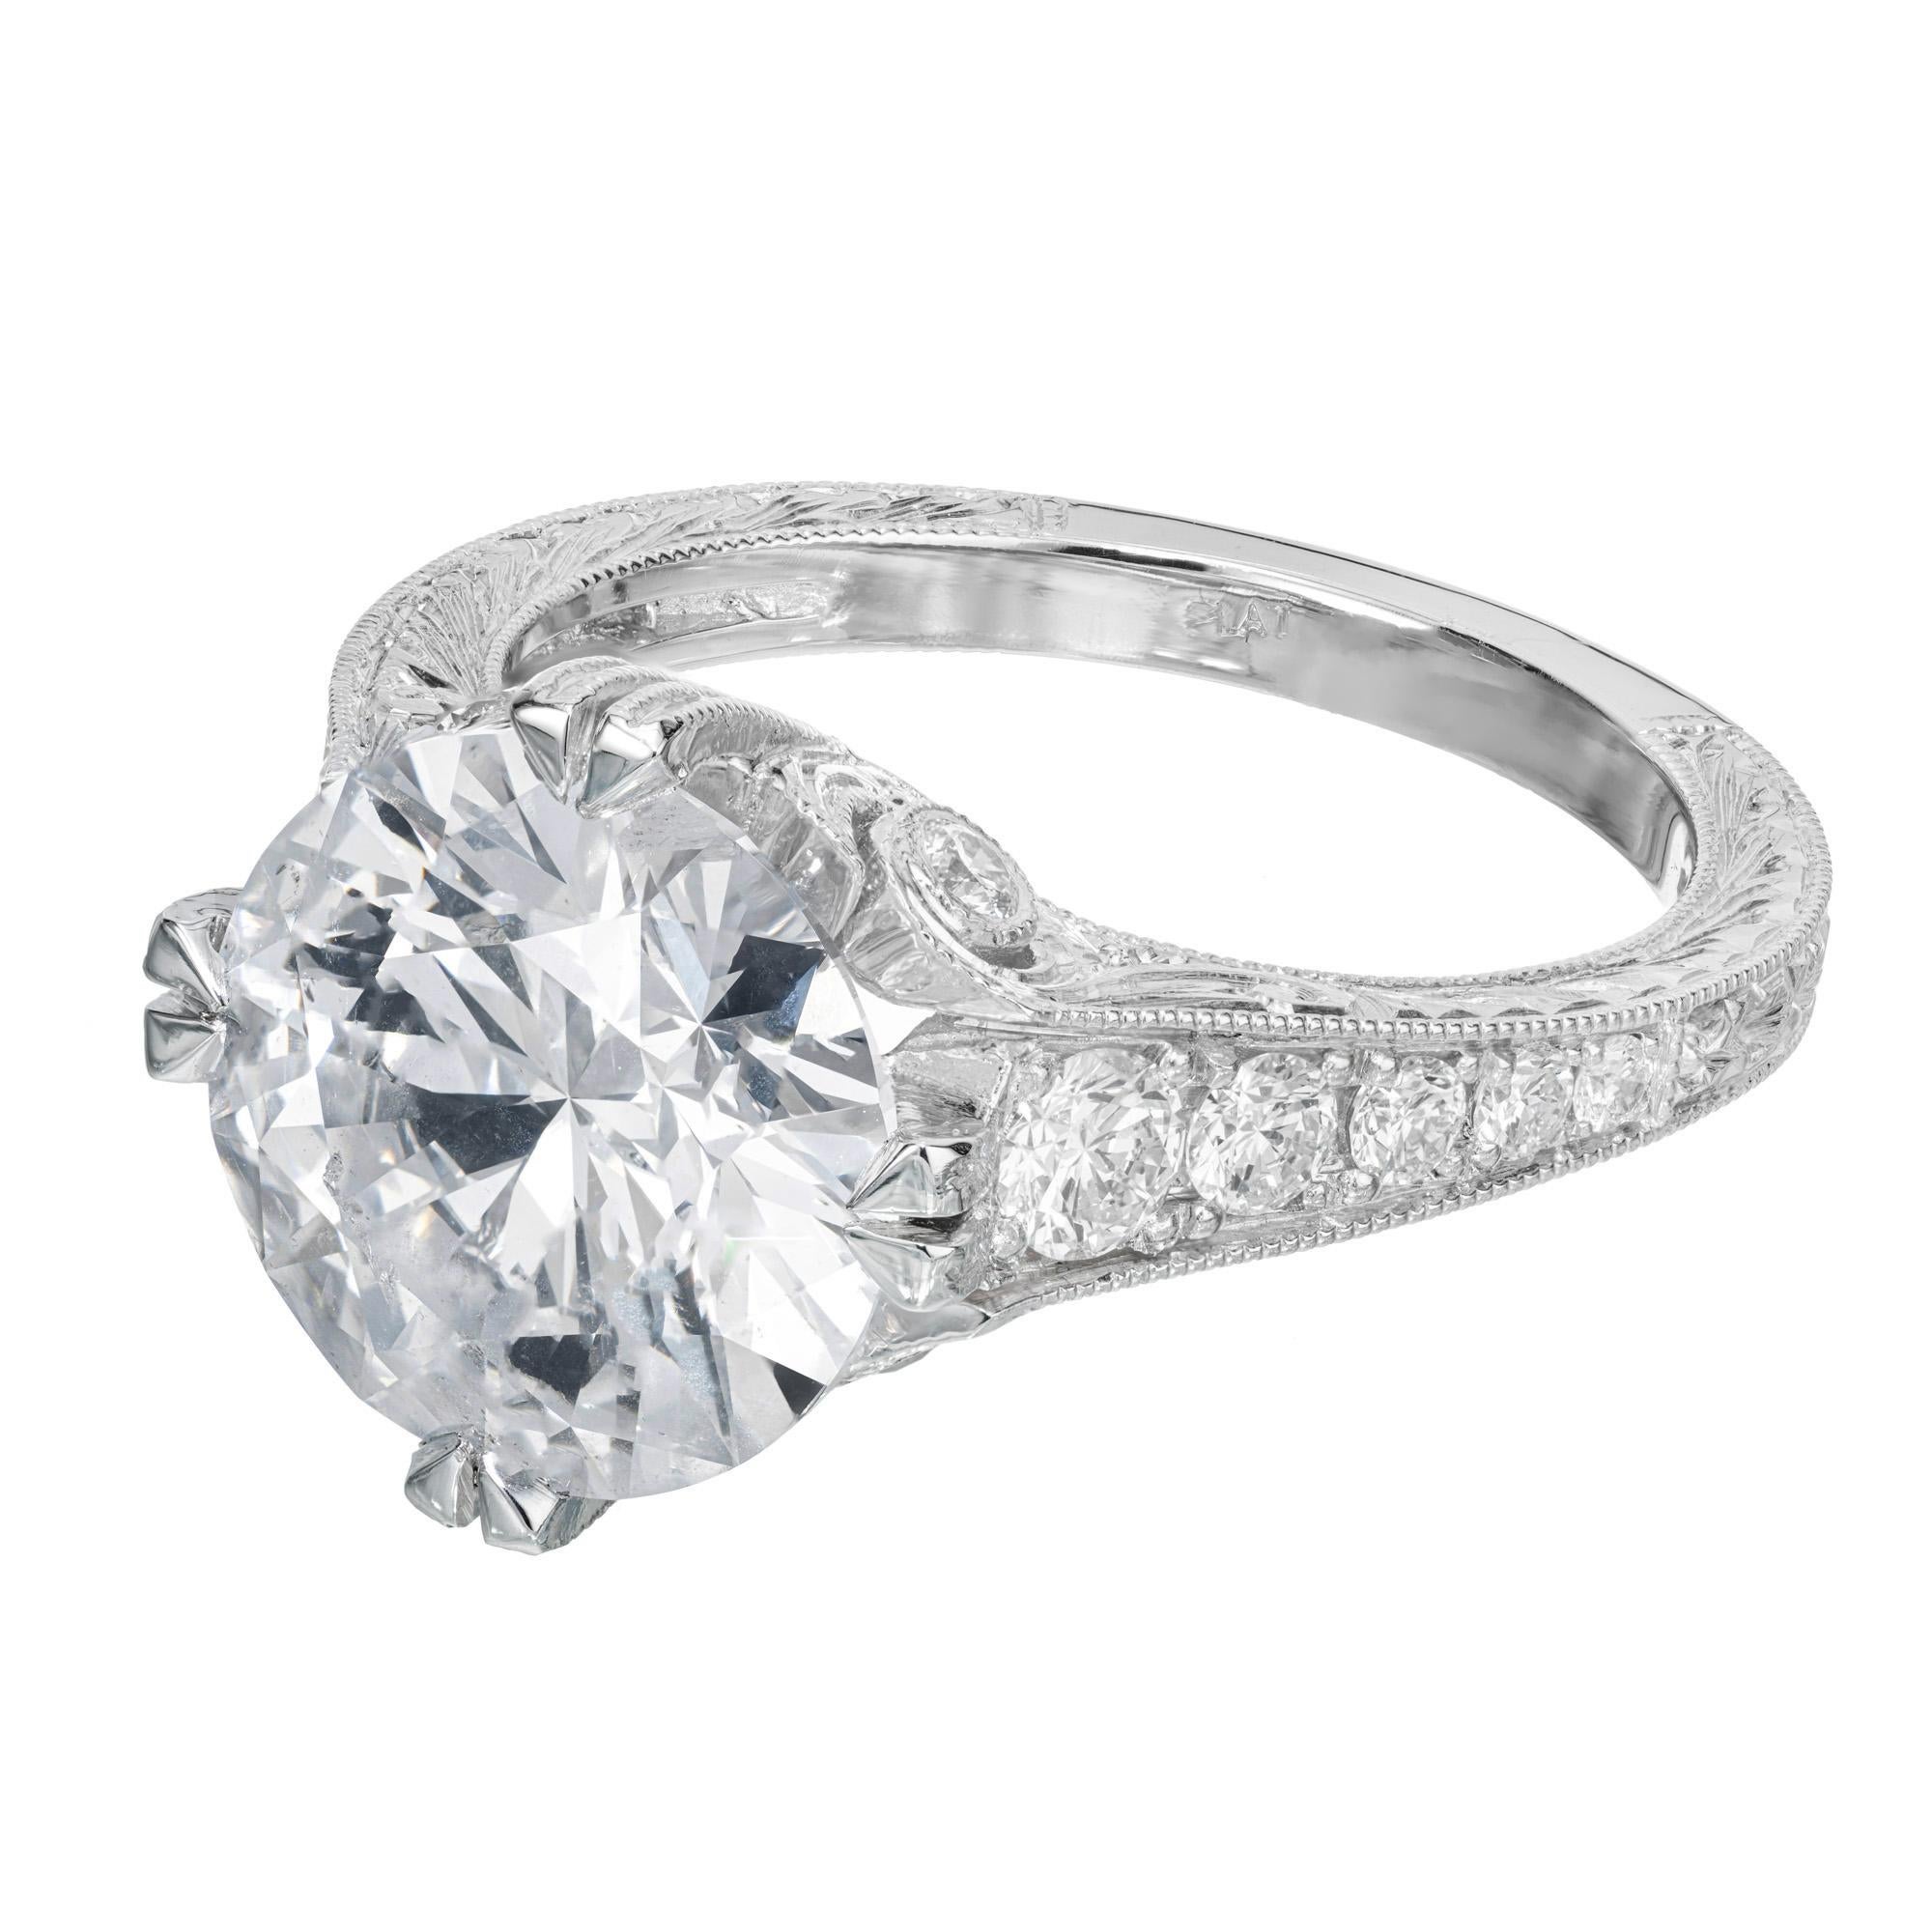 Diamond engagement ring. GIA certified European cut center 4.10ct diamond in a platinum engraved setting with 14 round brilliant cut accent diamonds. The diamond is from a 1920's estate. The platinum setting is a reproduction of the original ring,